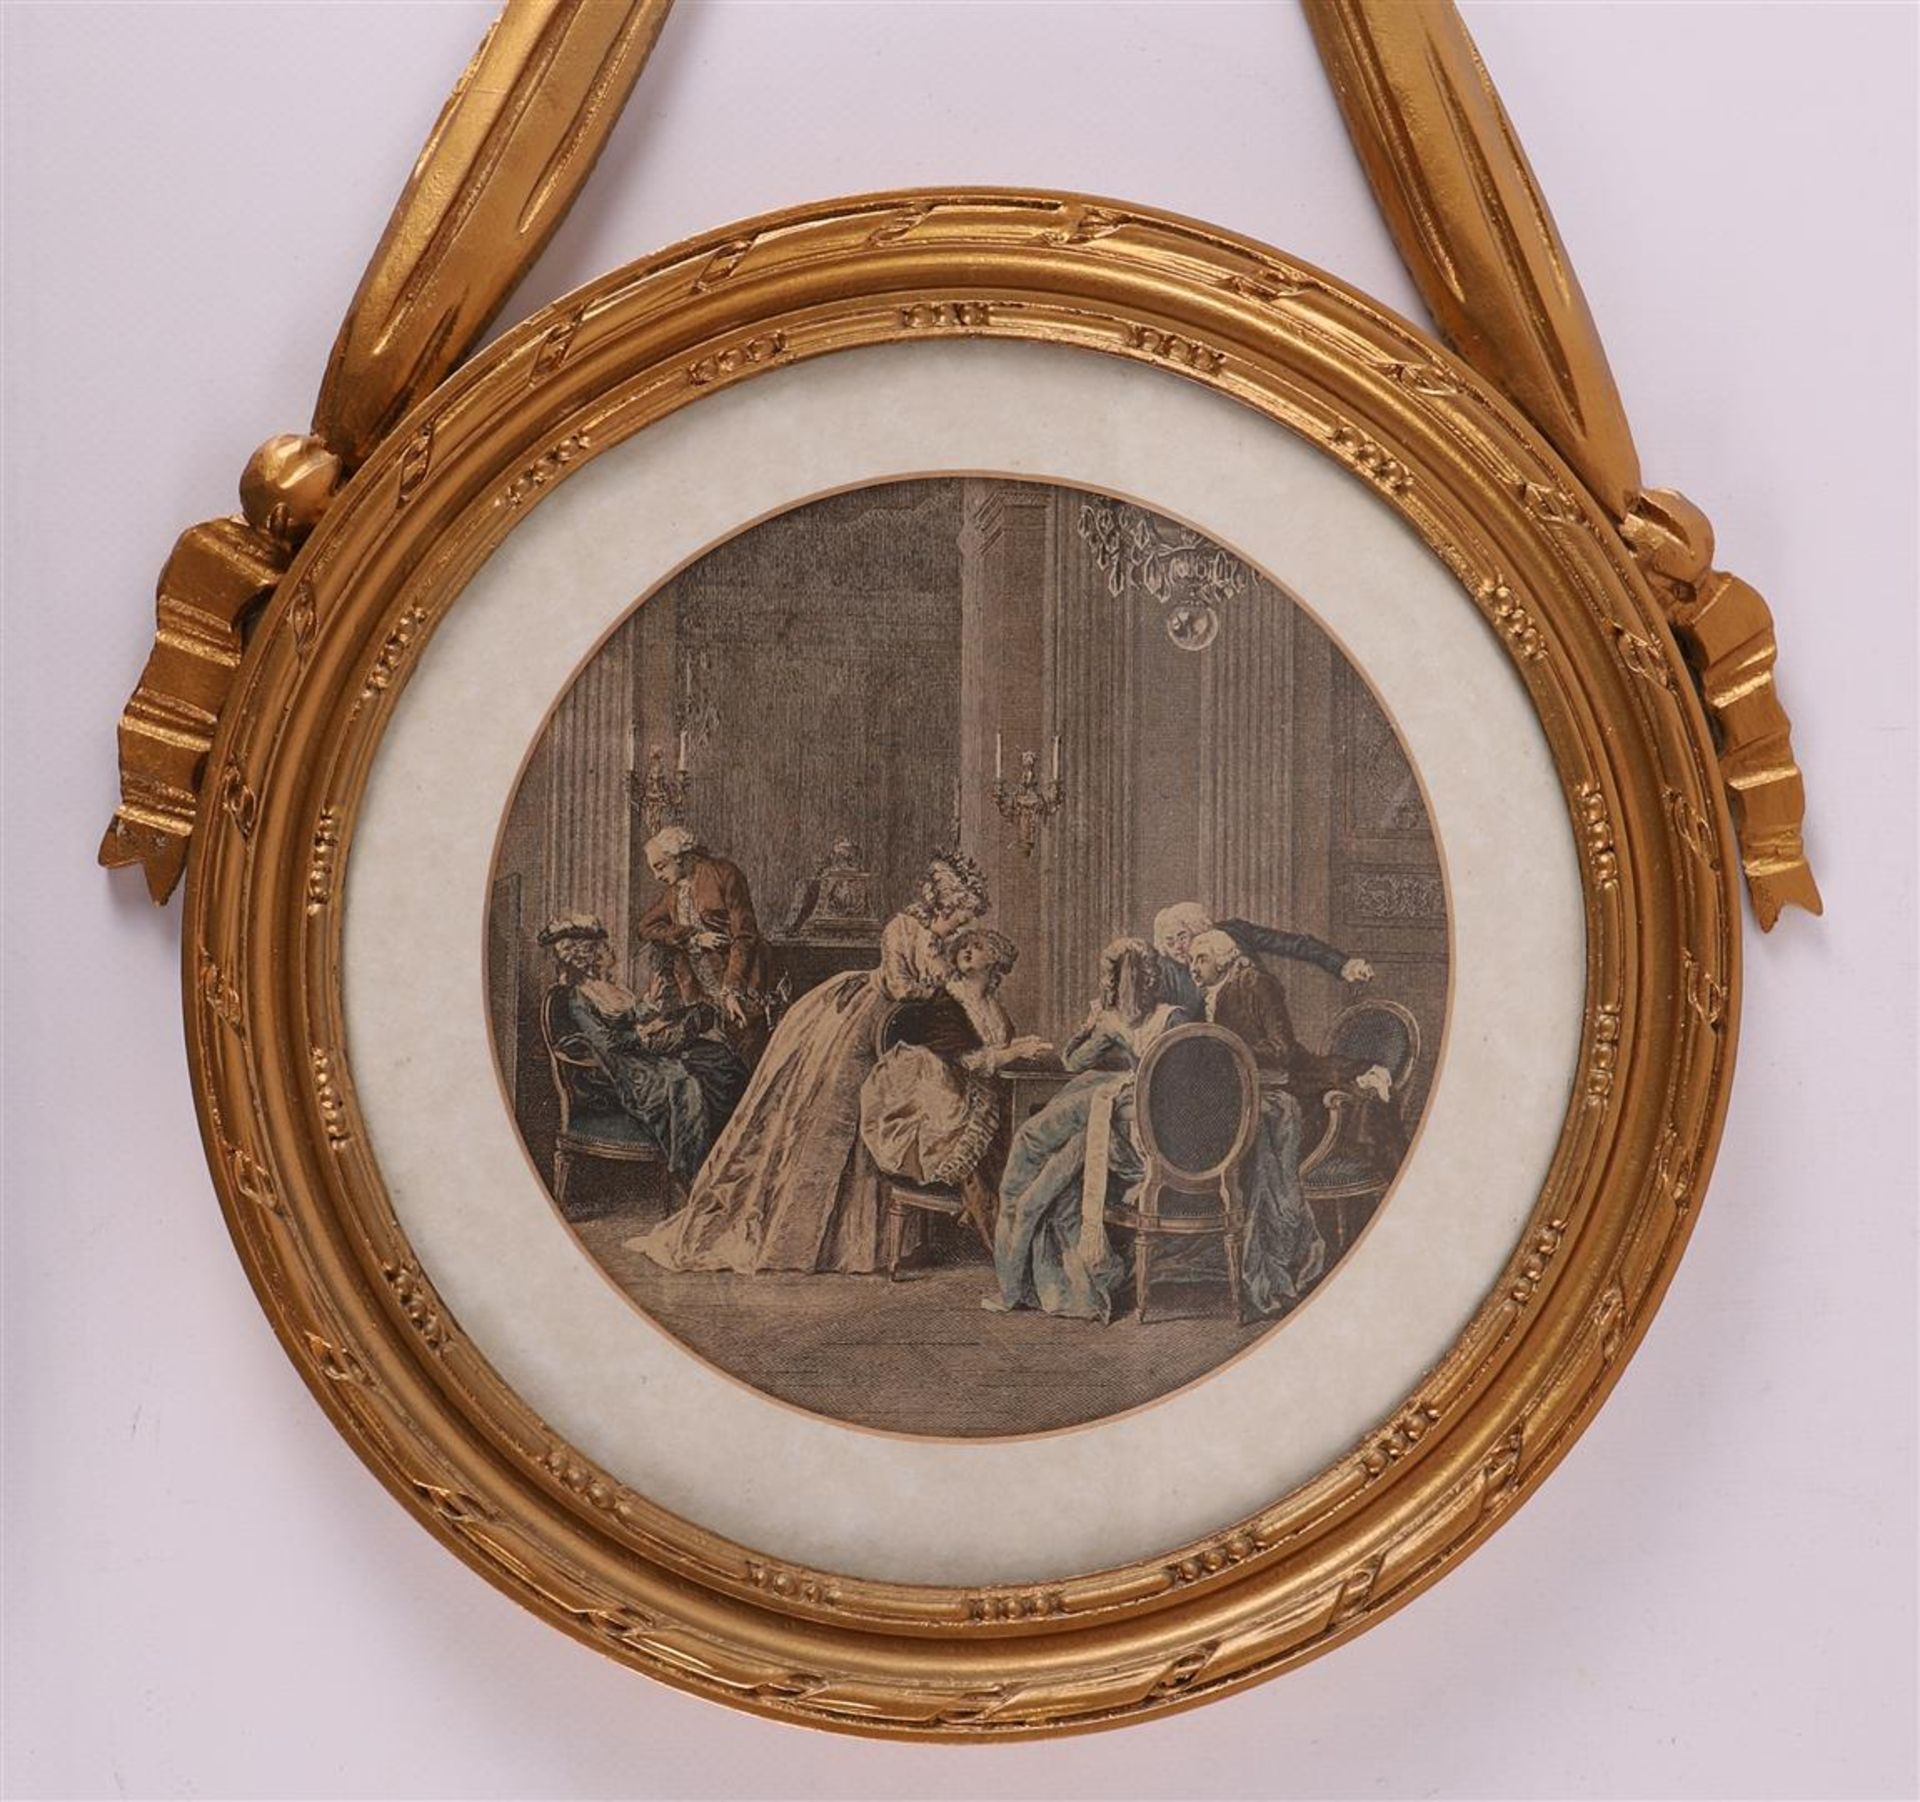 A set of round gilt wooden frames with bow ornament, 19th century. - Image 2 of 3